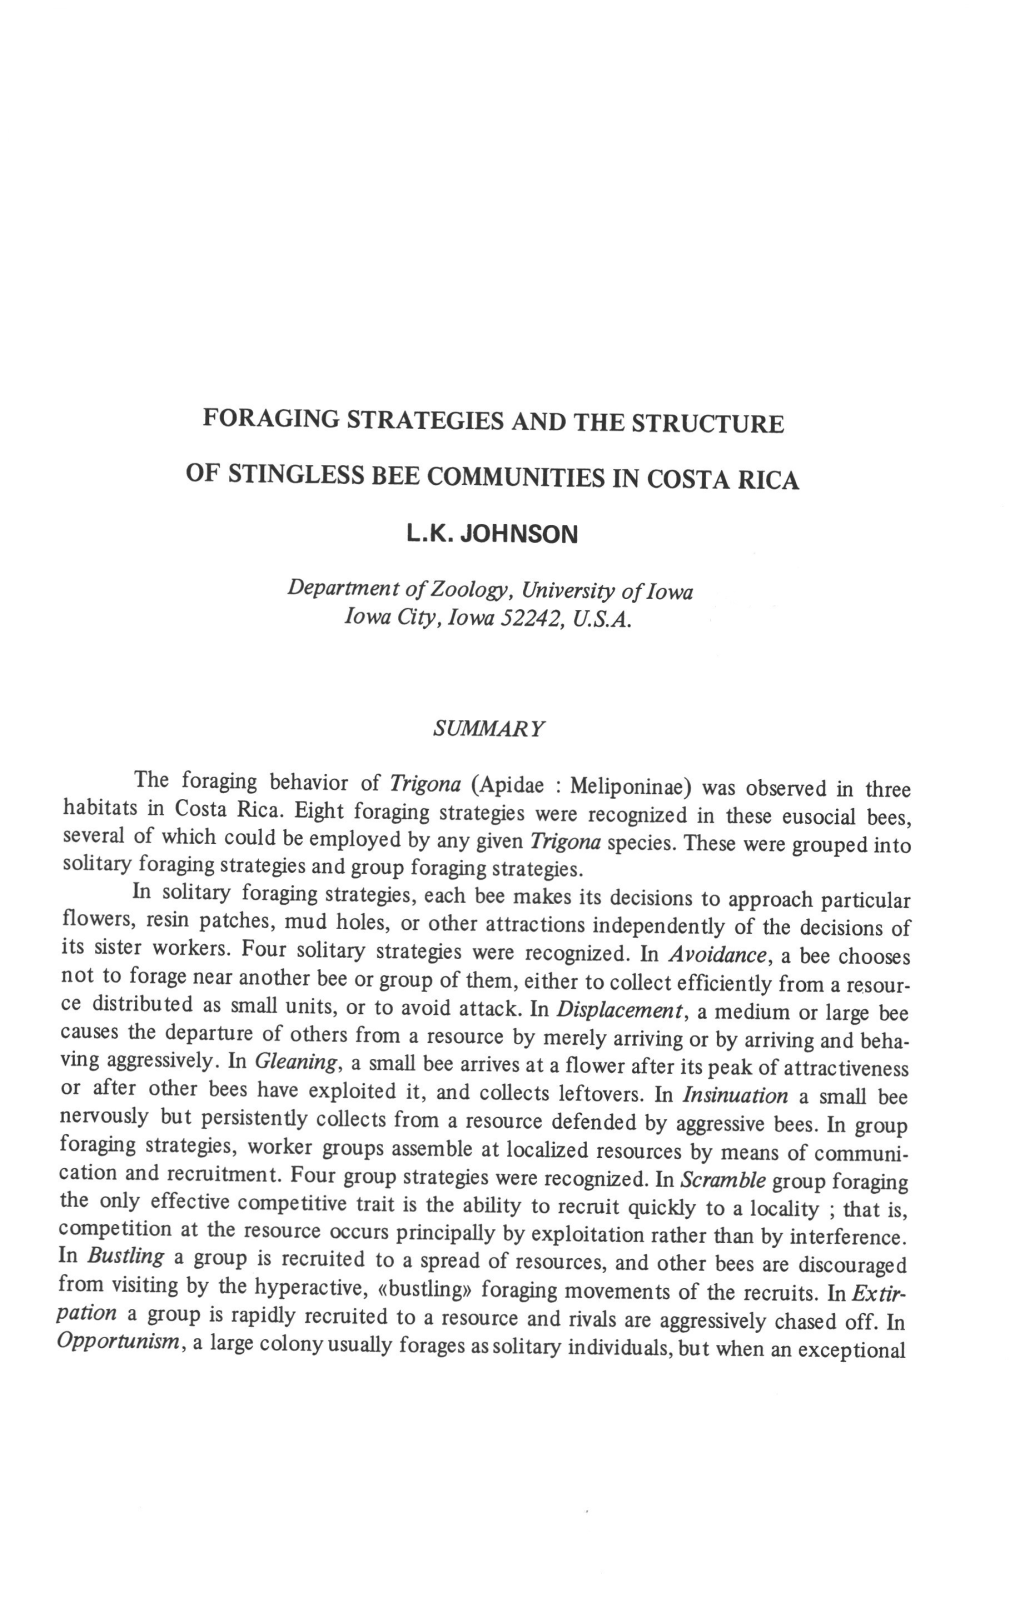 FORAGING STRATEGIES and the STRUCTURE of STINGLESS BEE COMMUNITIES in COSTA RICA L.K. JOHNSON Department of Zoology, University